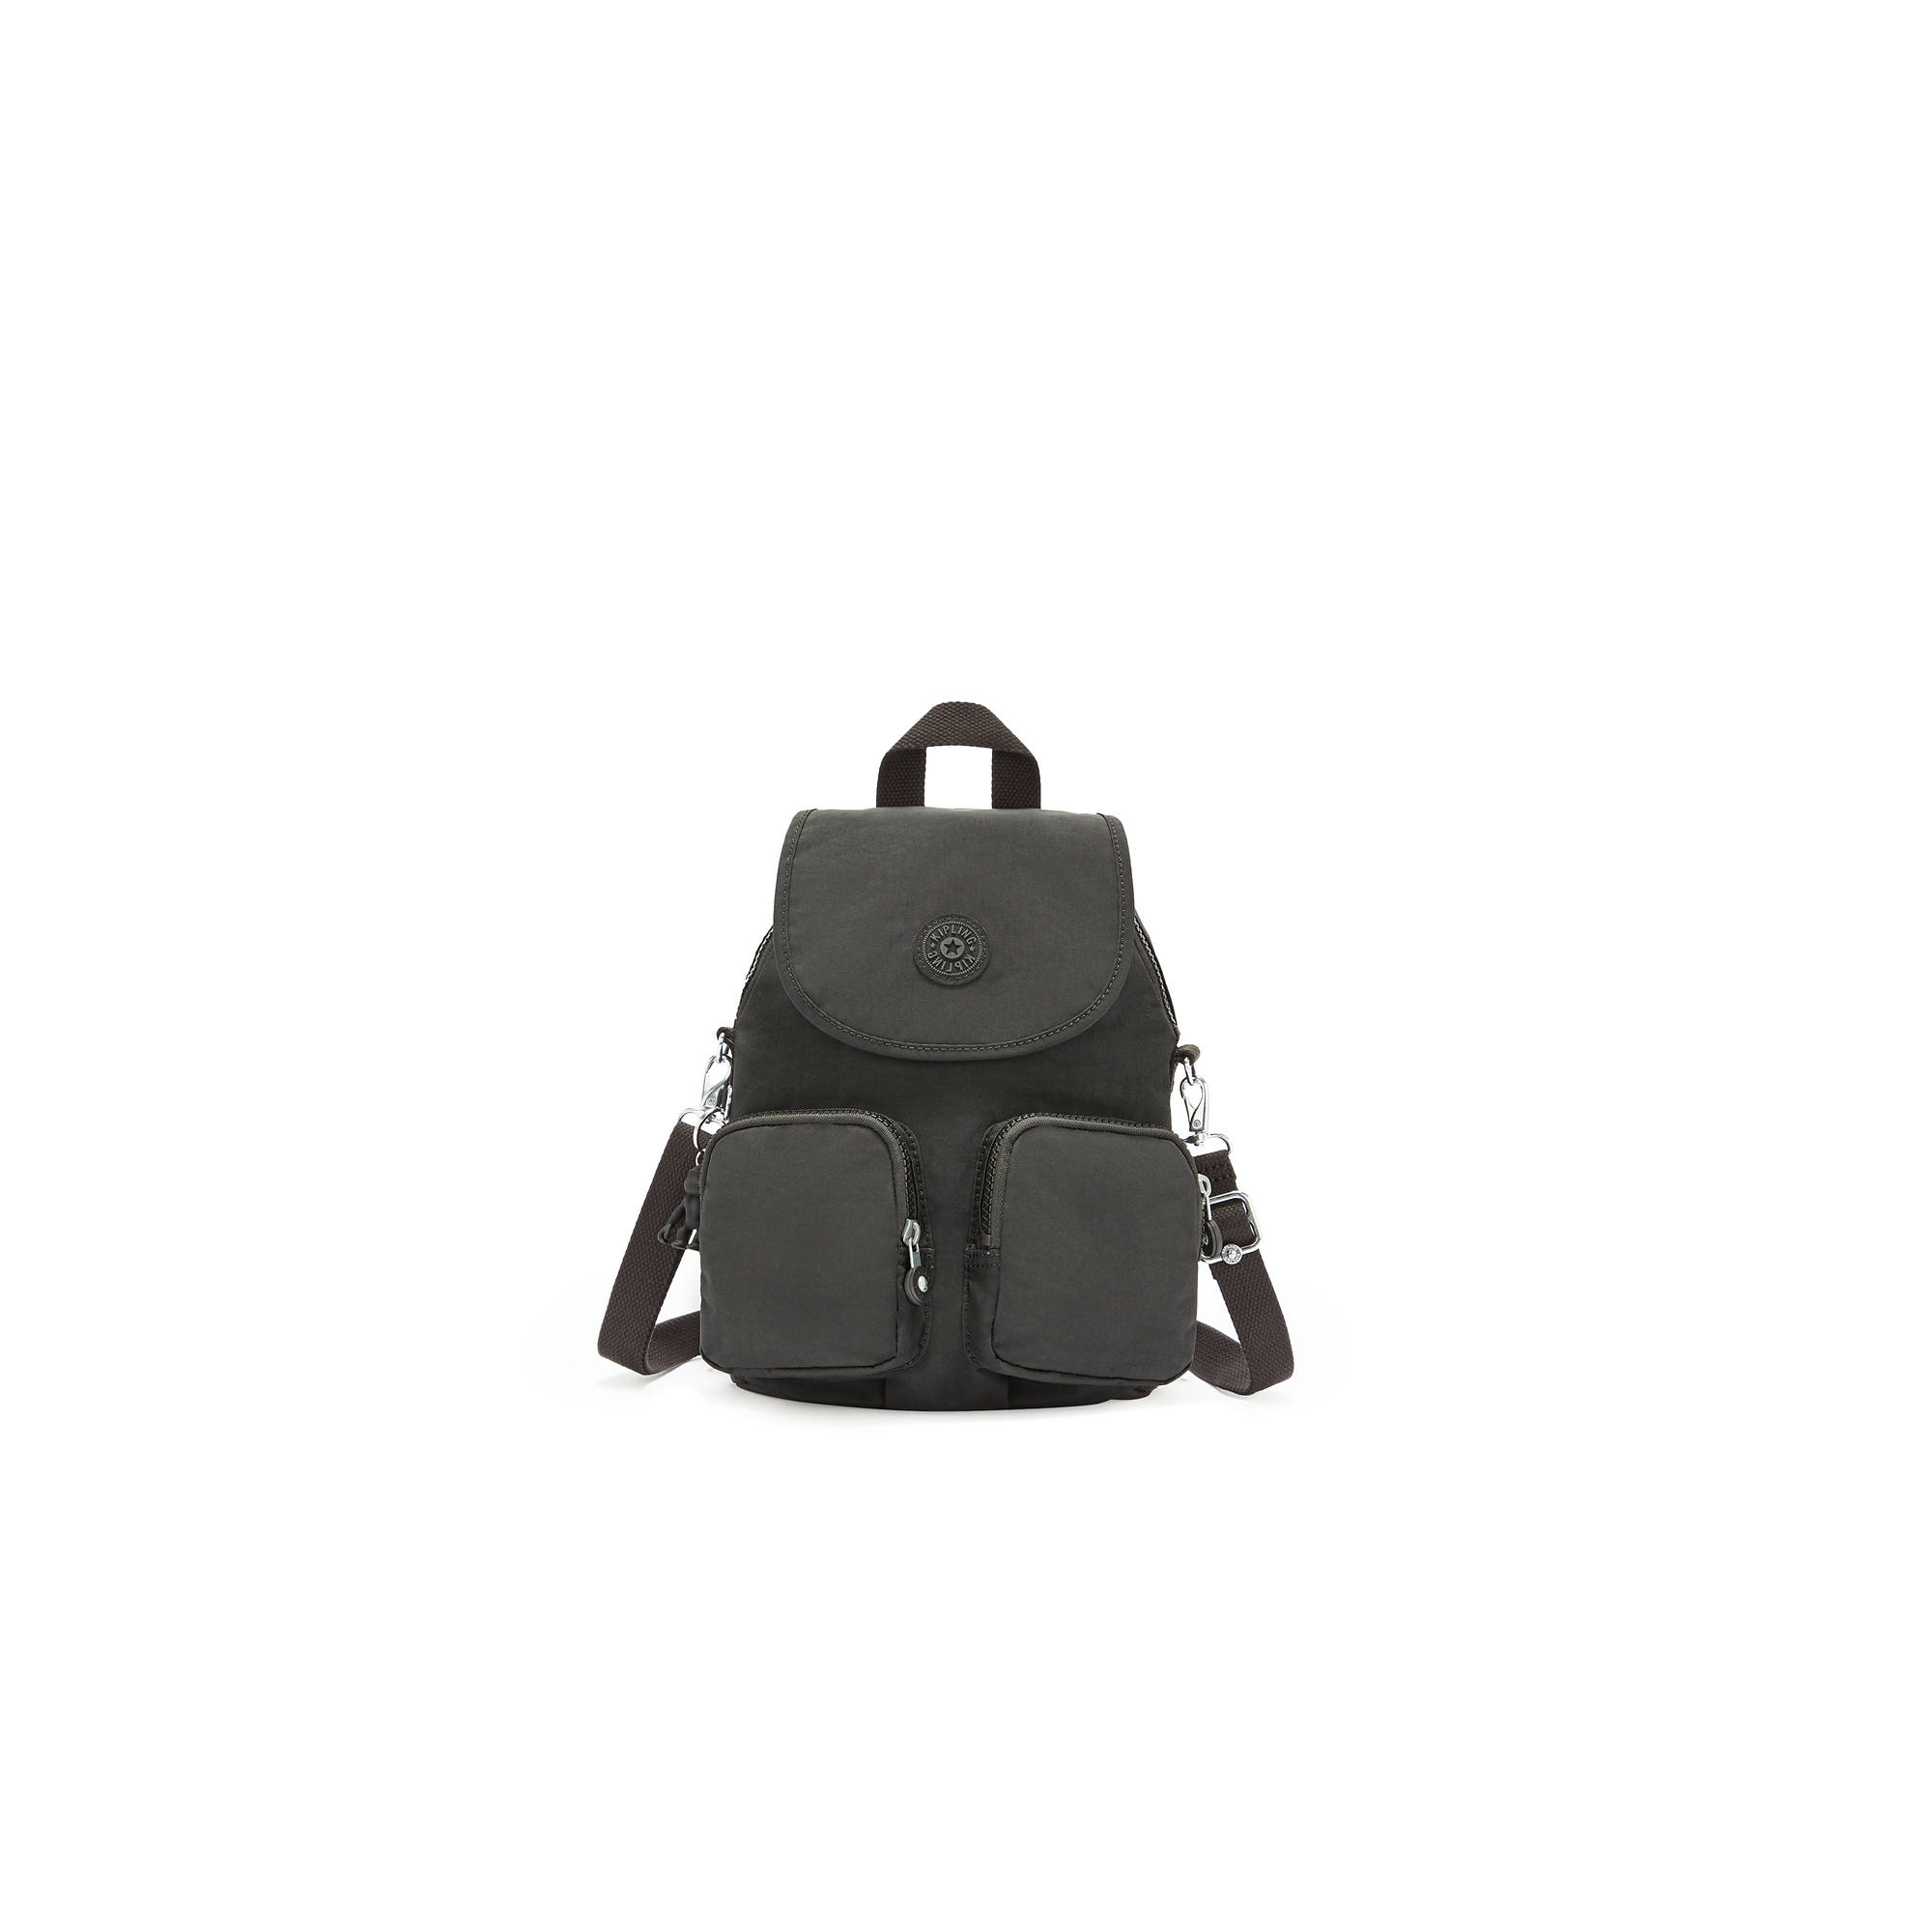 Firefly Up Convertible Backpack